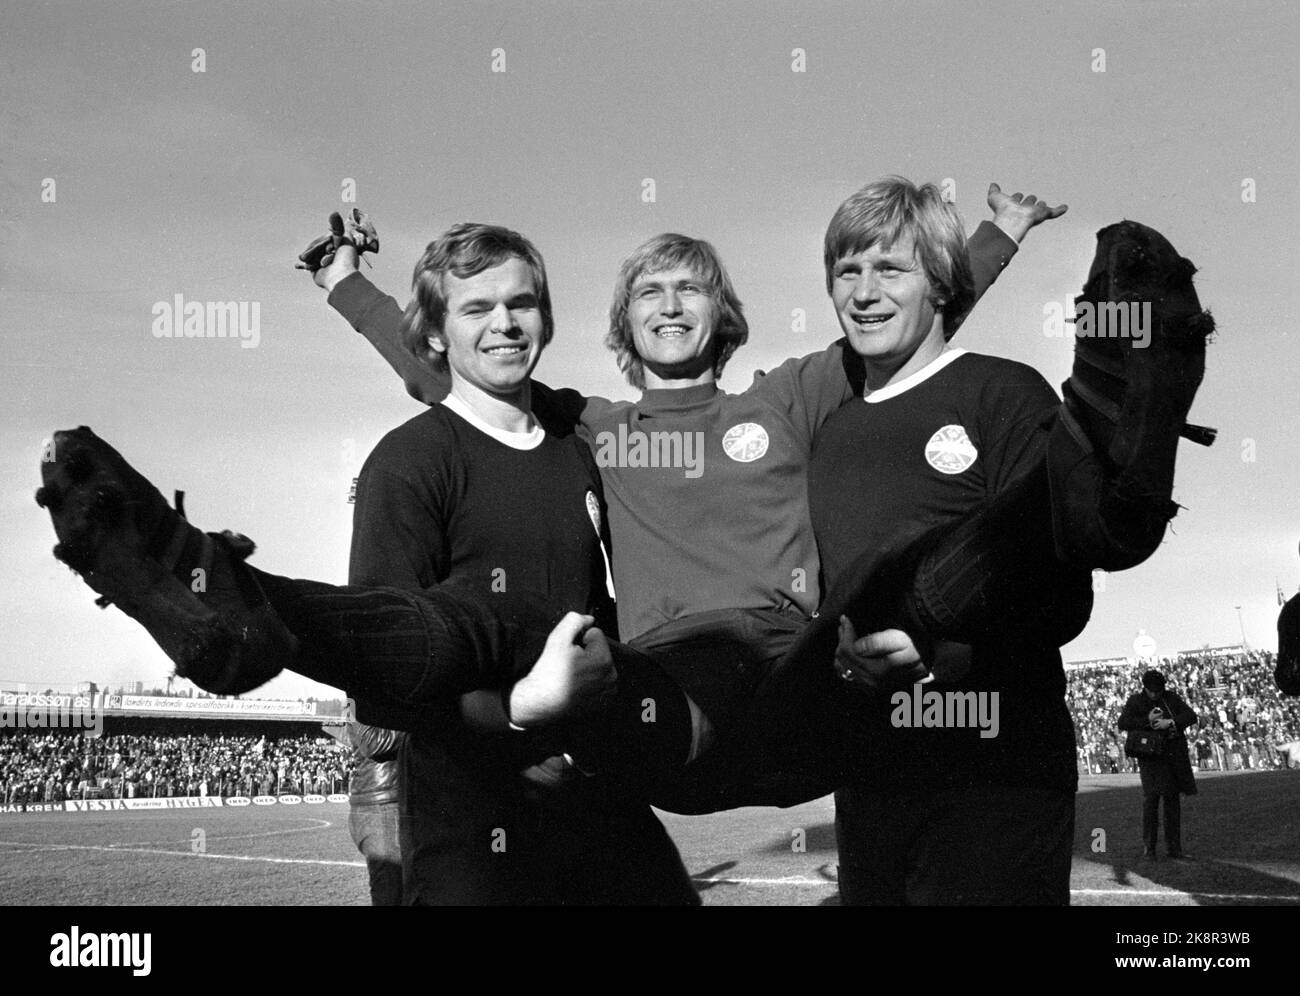 Oslo October 1973. Soccer. Cup final Strømsgodset - Rosenborg 1-0, Ullevaal Stadium. SIF players cheer. In the middle Inge Thun. Steinar Pettersen T.H. Ntb archive photo / ntb Stock Photo